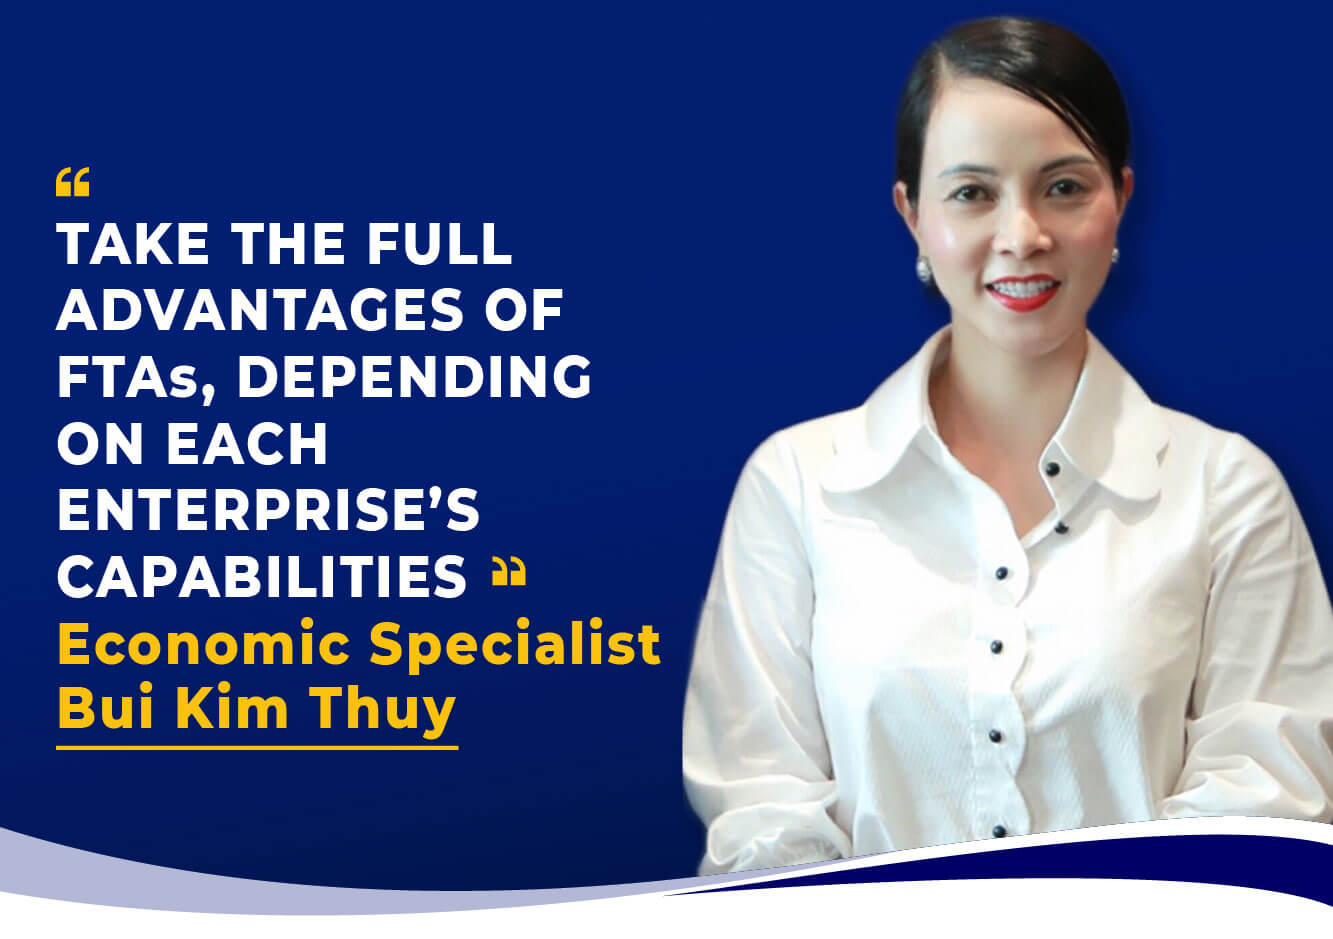 TAKE THE FULL ADVANTAGES OF FTAs, DEPENDING ON EACH ENTERPRISE’S CAPABILITIES Economic Specialist Bui Kim Thuy